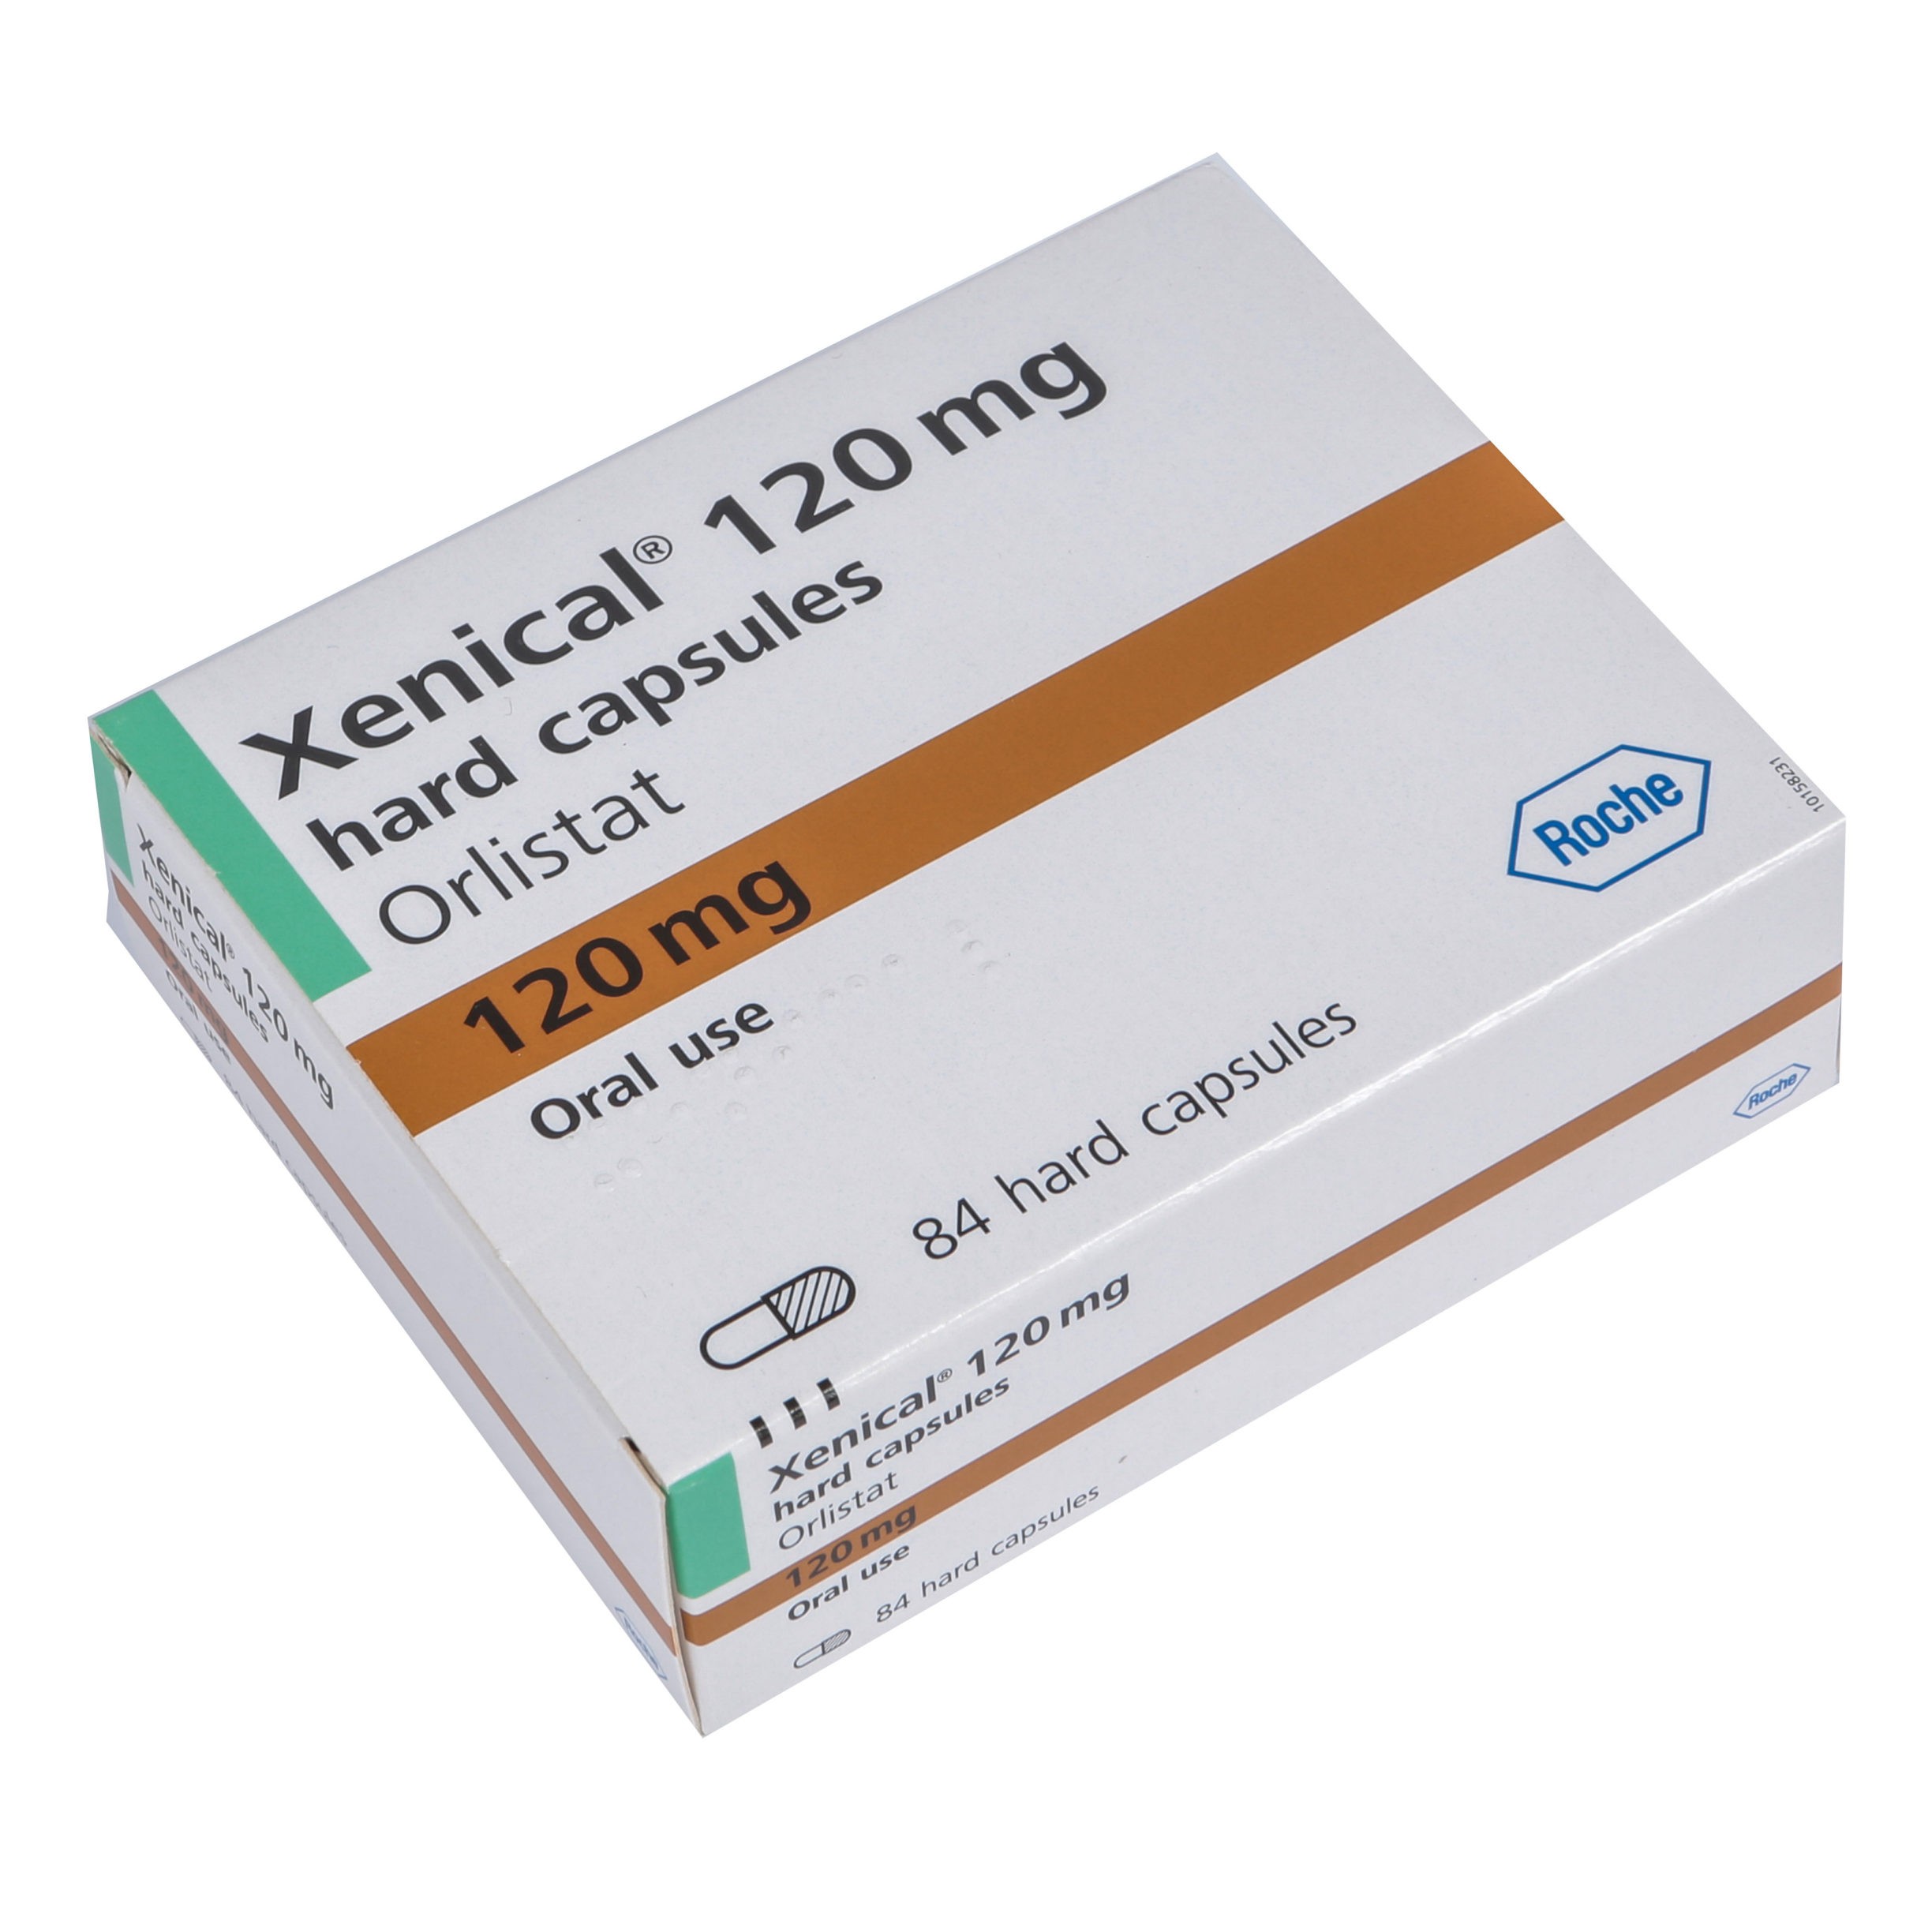 Xenical 120mg Capsules (42 Capsules)